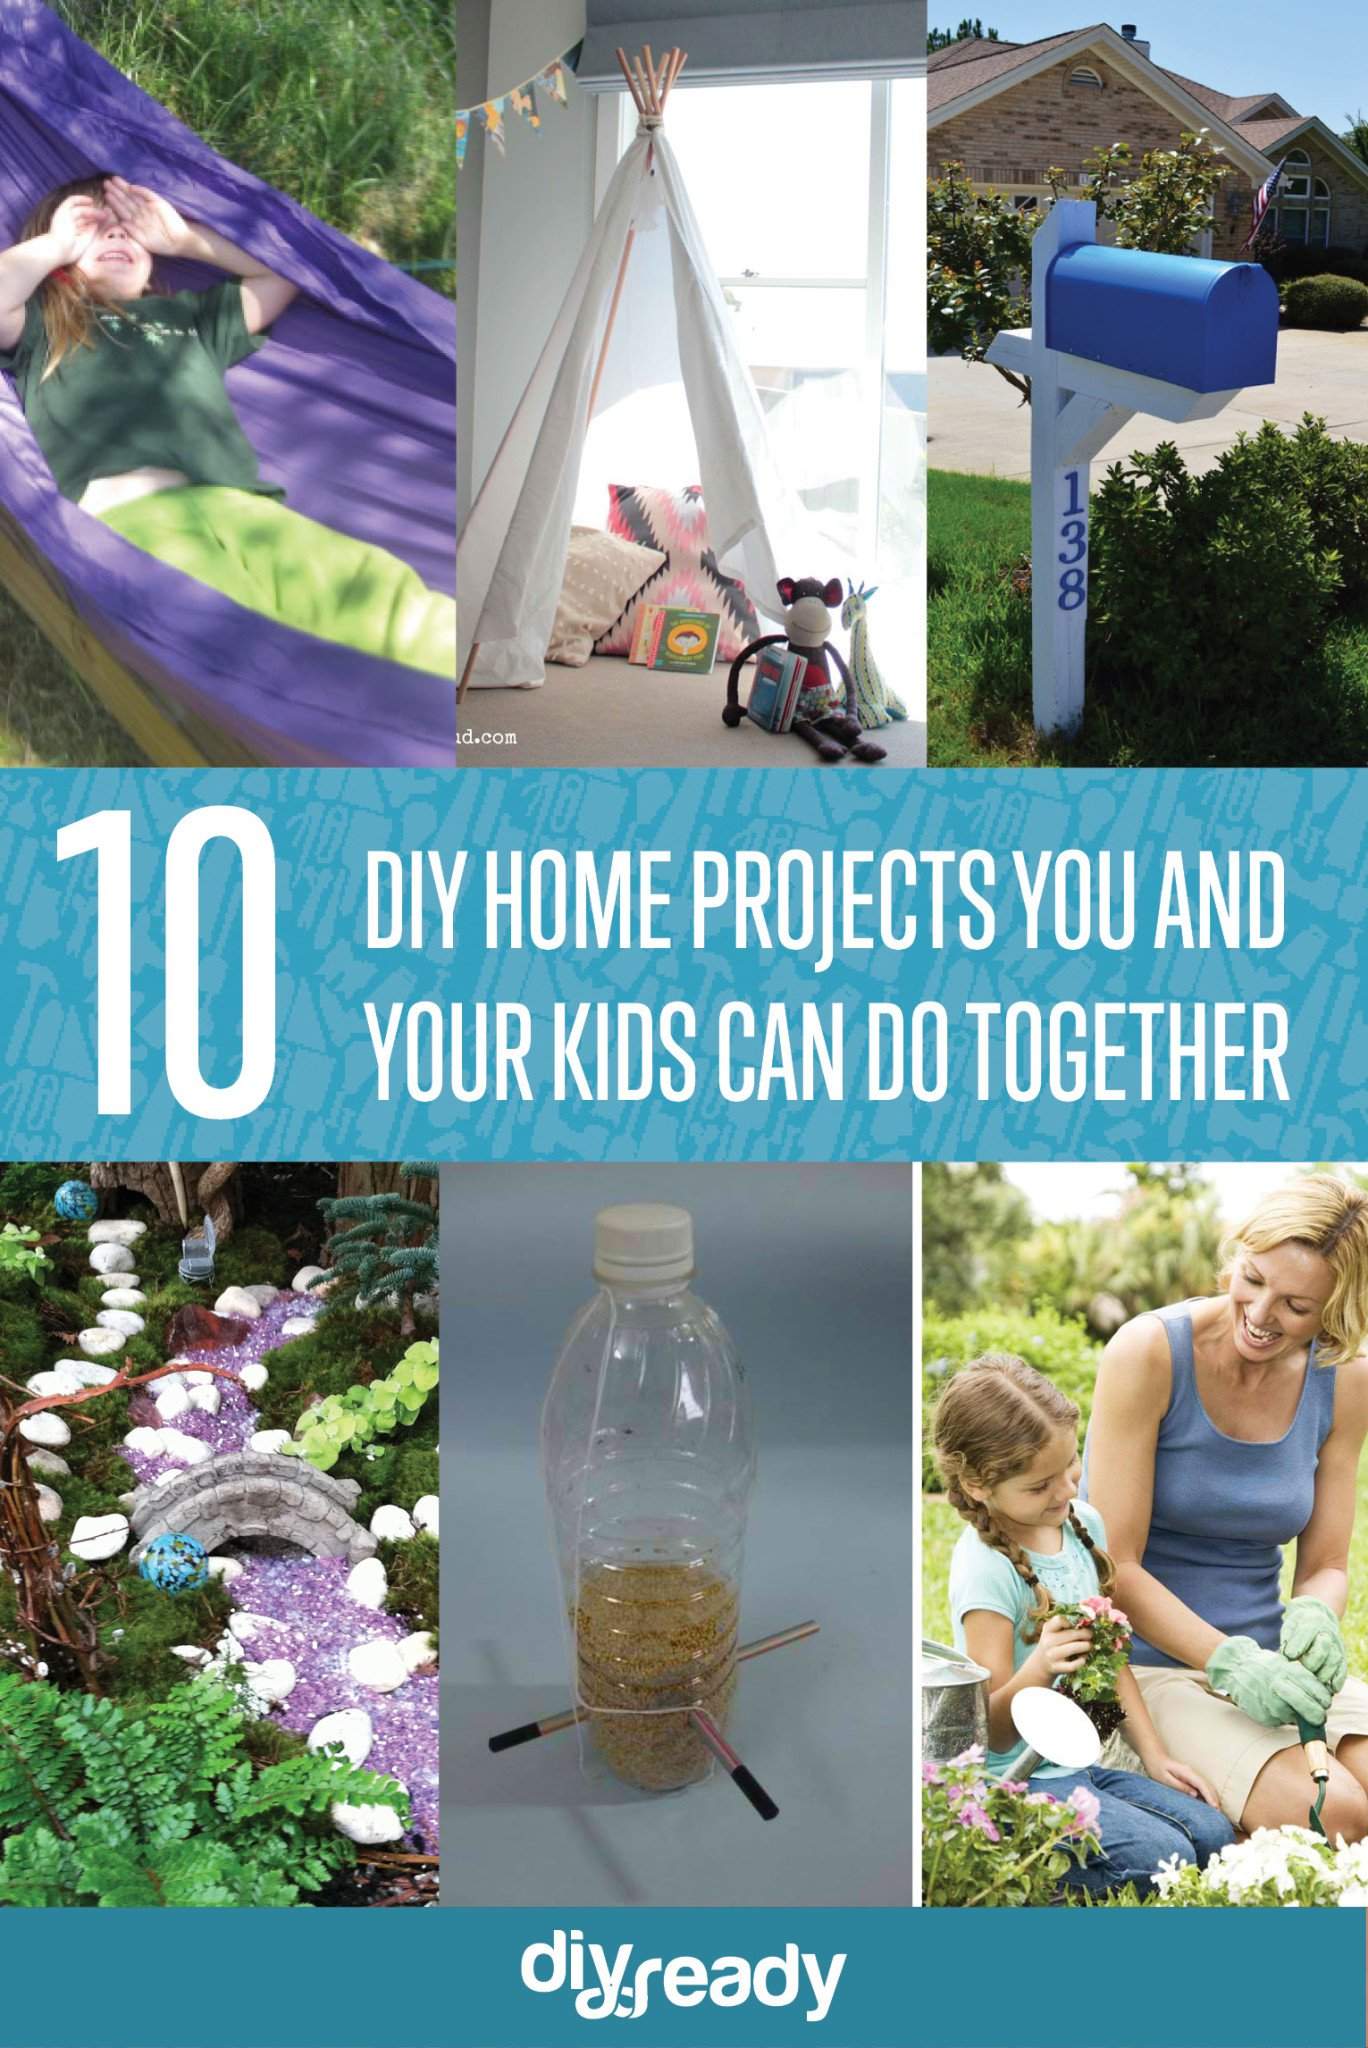 10 Easy DIY Home Projects For Kids You Can Do Together | Make your DIY Home Projects Be Filled With Joy And Laughter of Kids